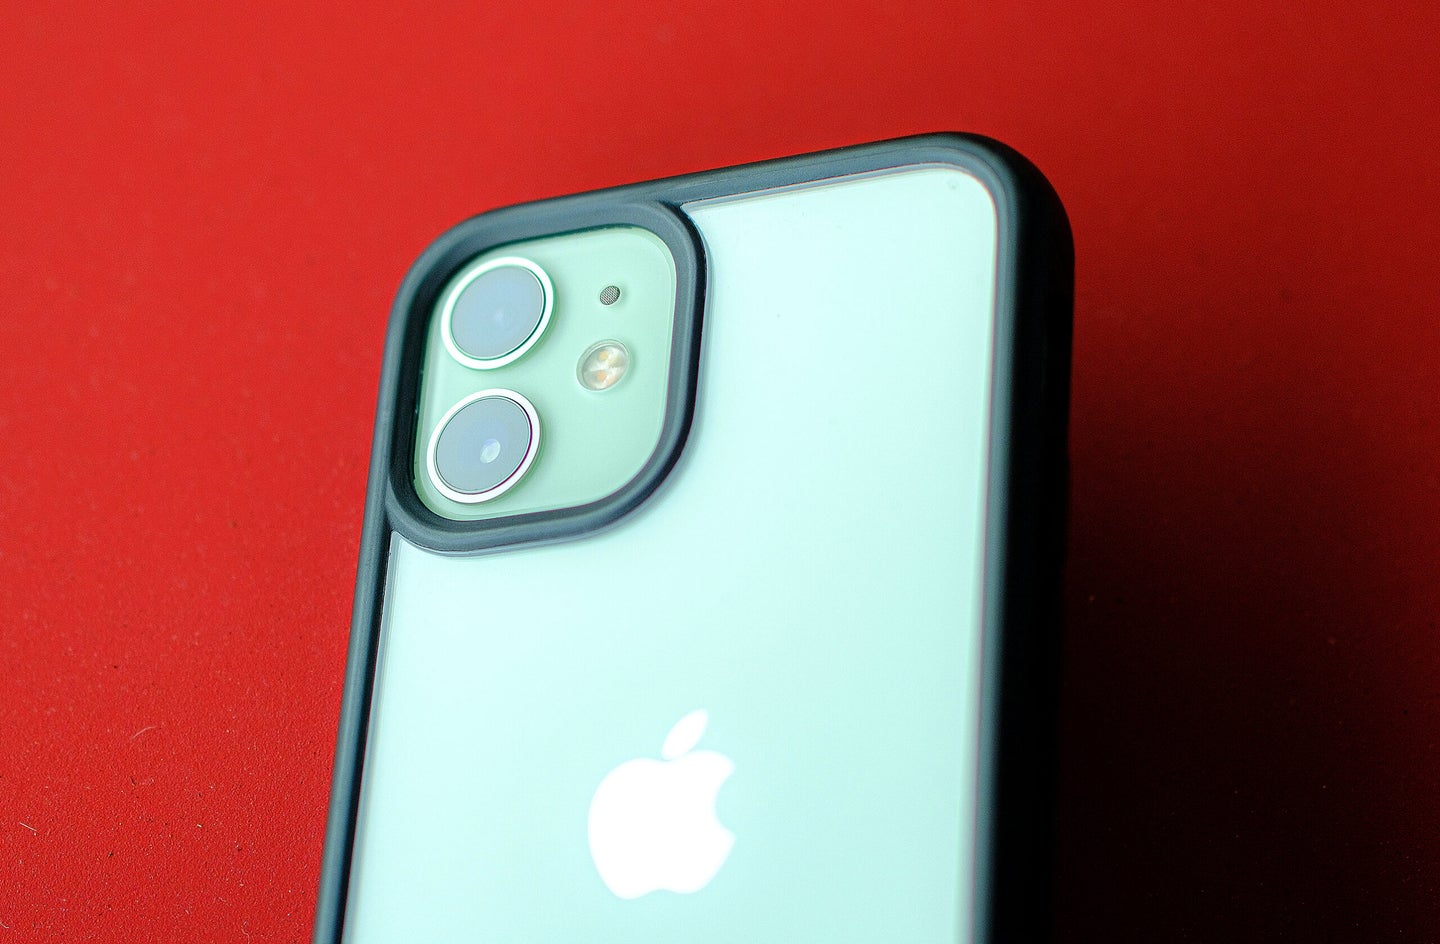 A green iPhone camera on a red background